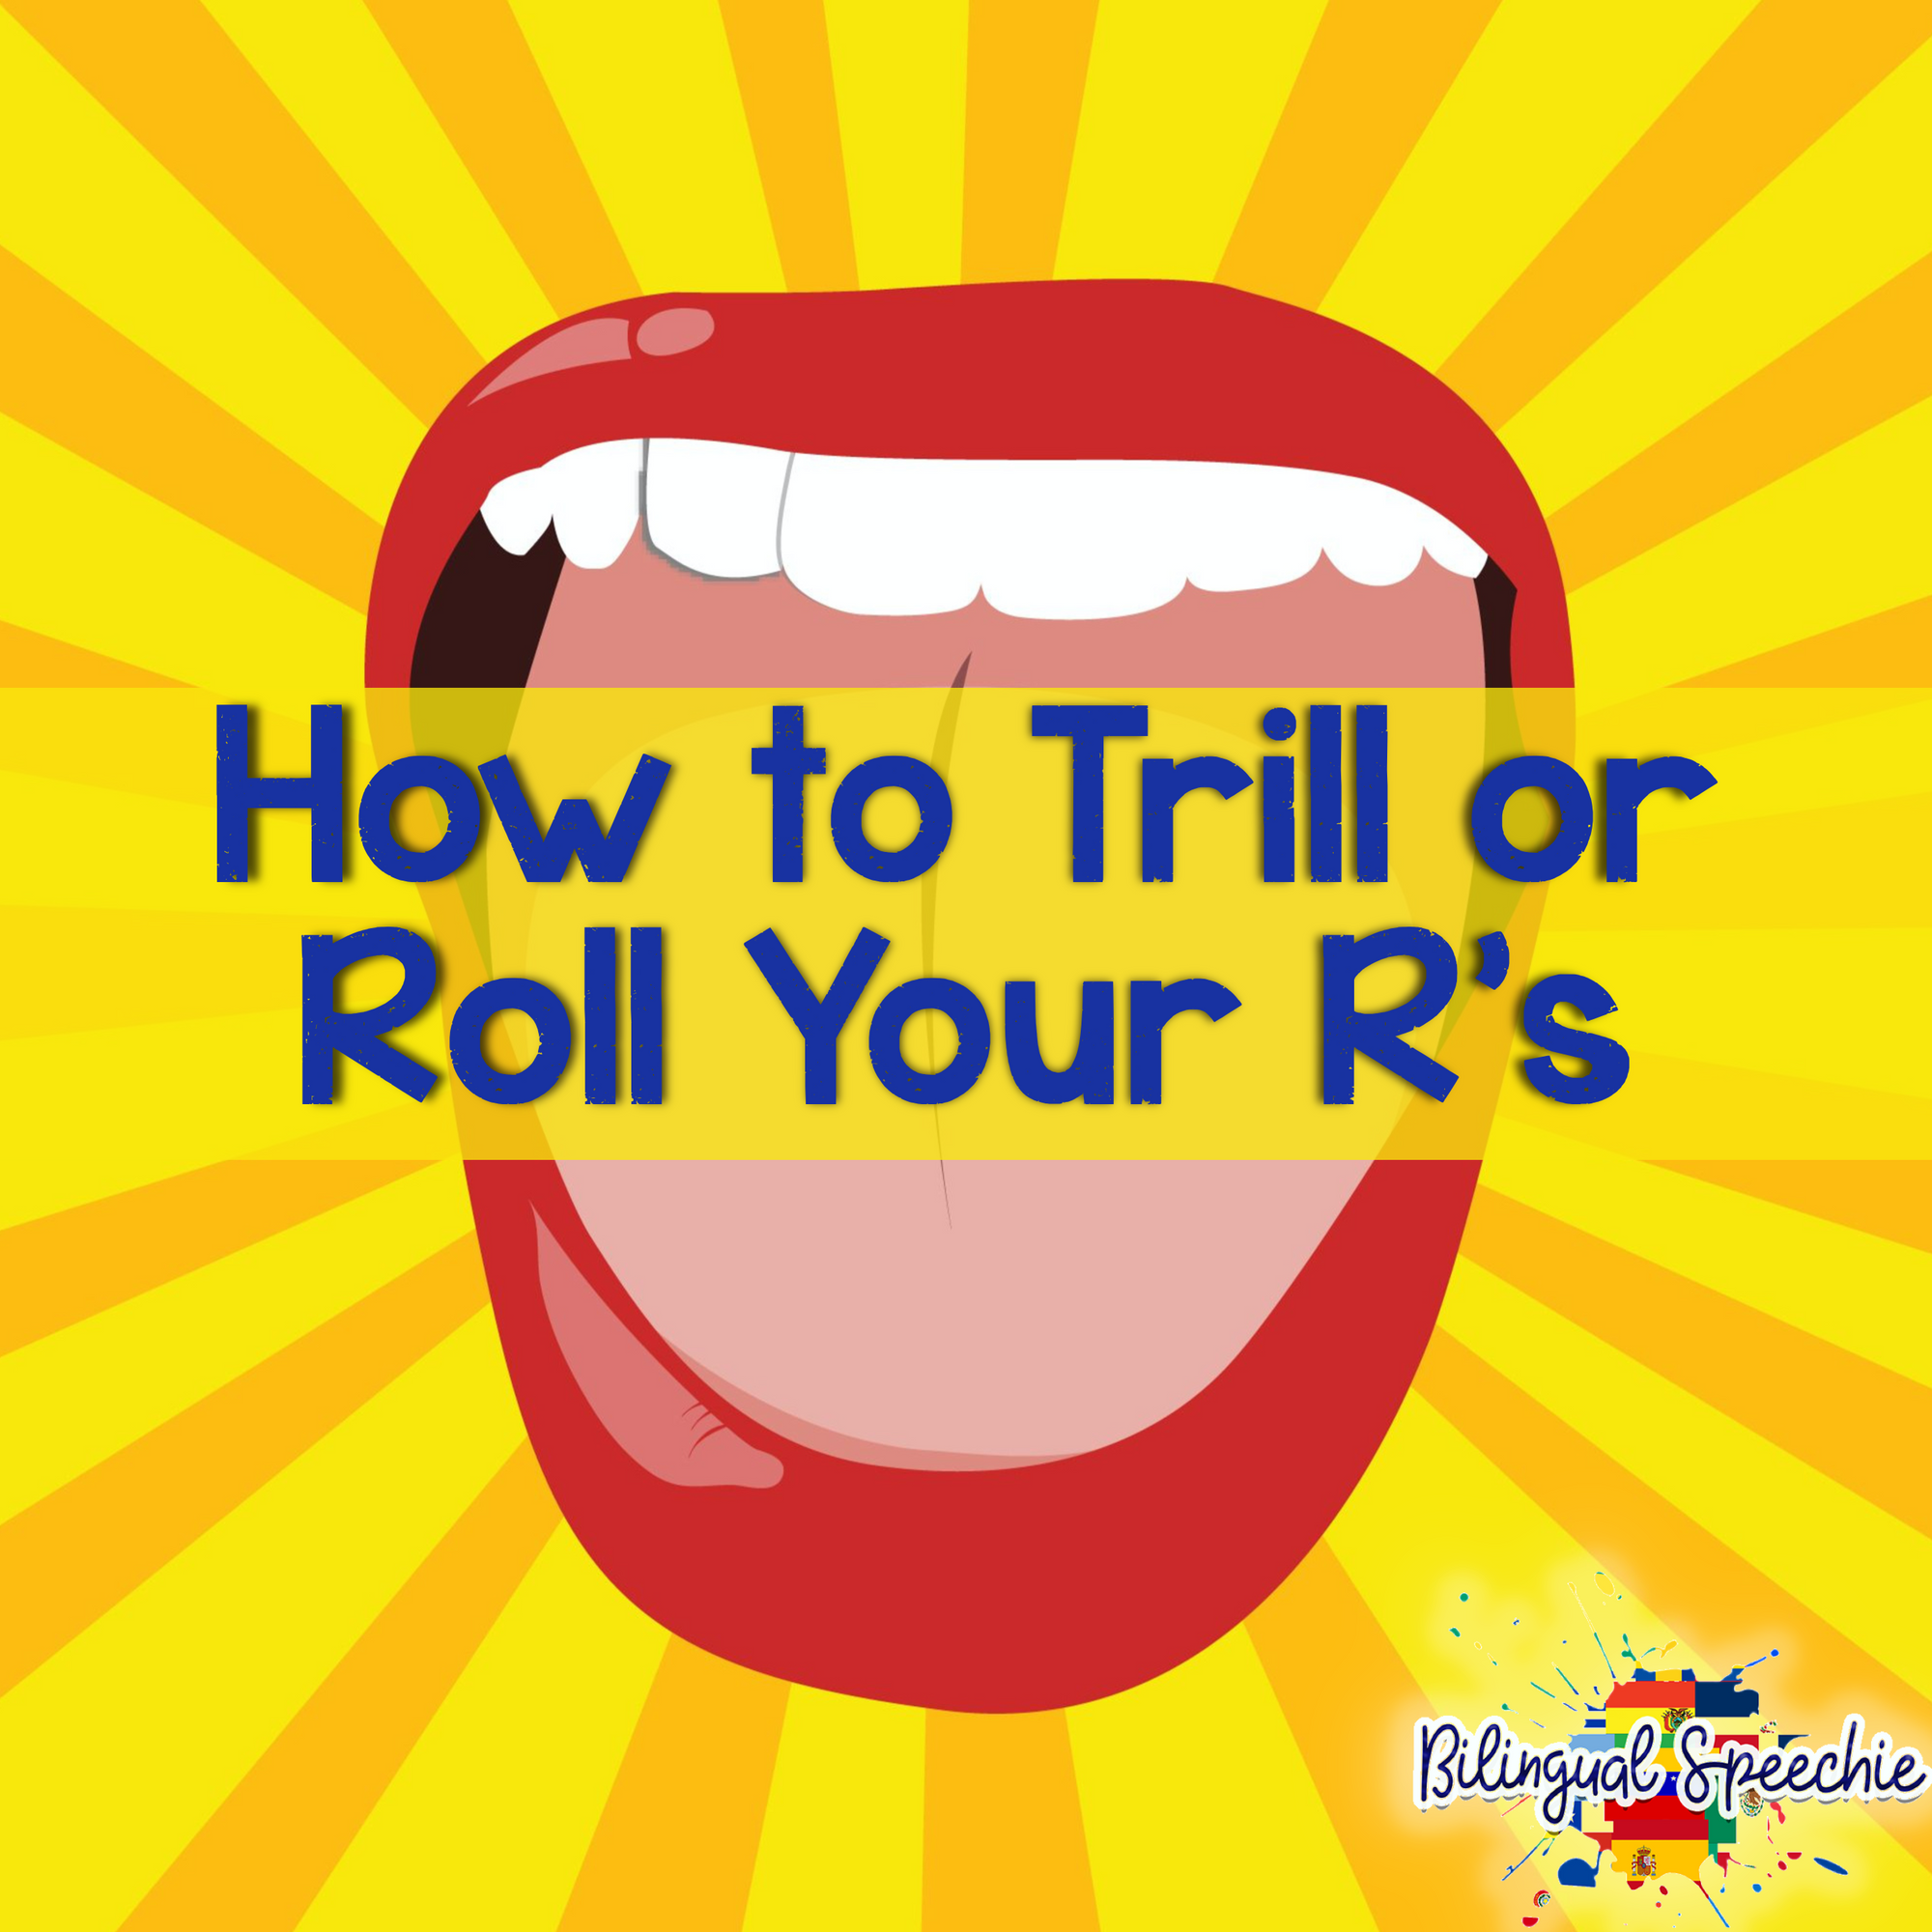 How to Trill or Roll Your R's